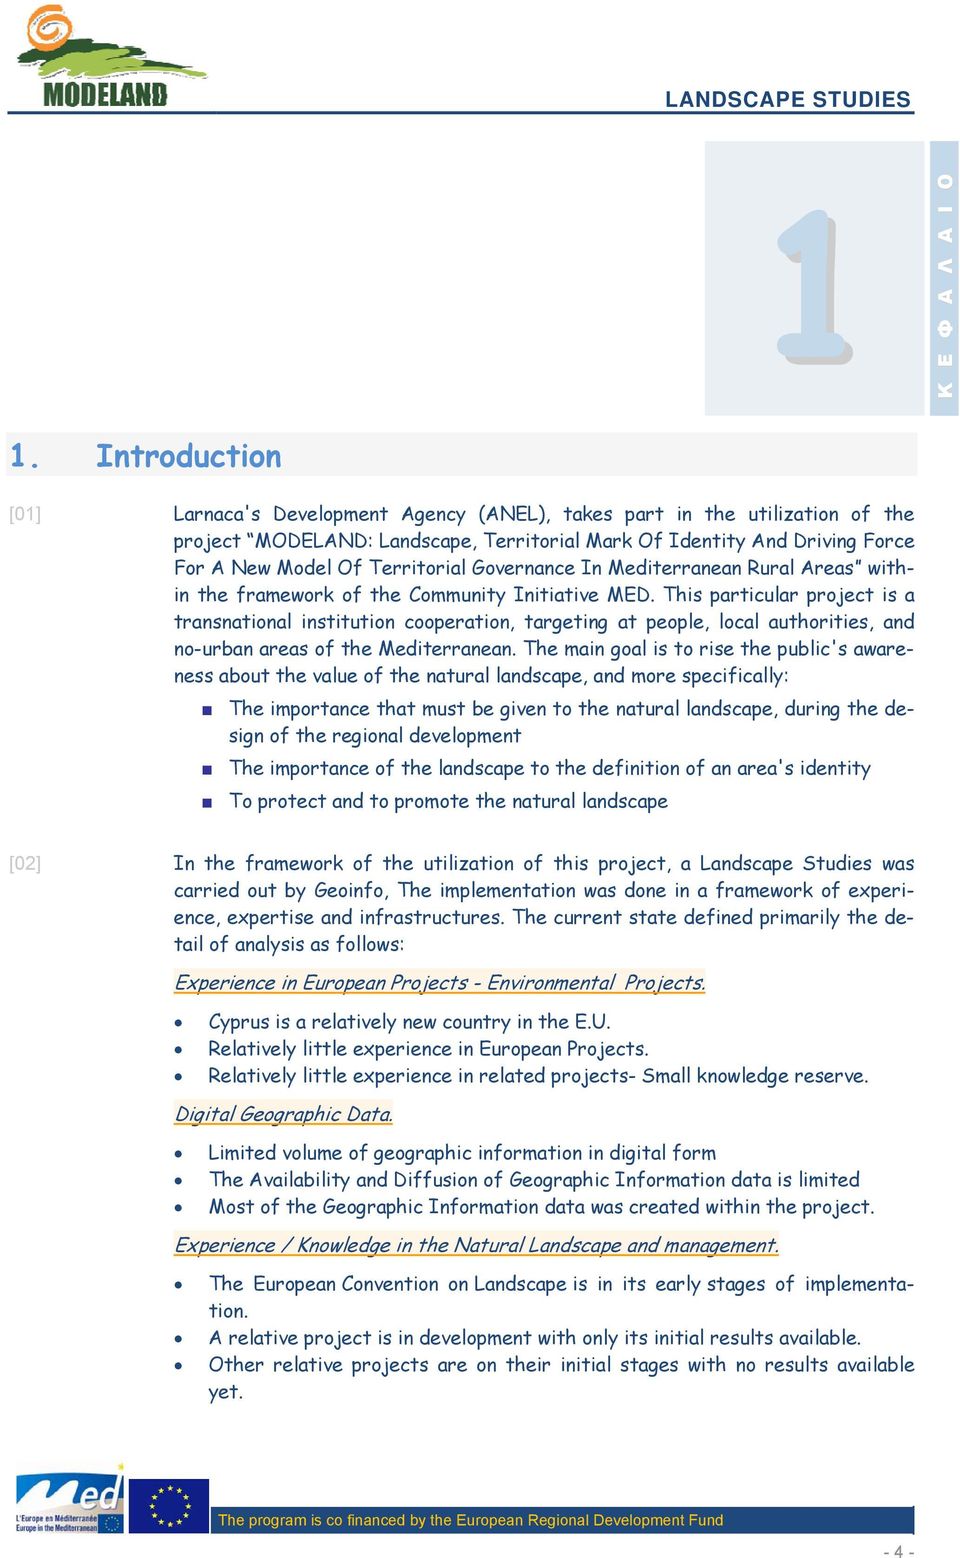 Governance In Mediterranean Rural Areas within the framework of the Community Initiative MED.